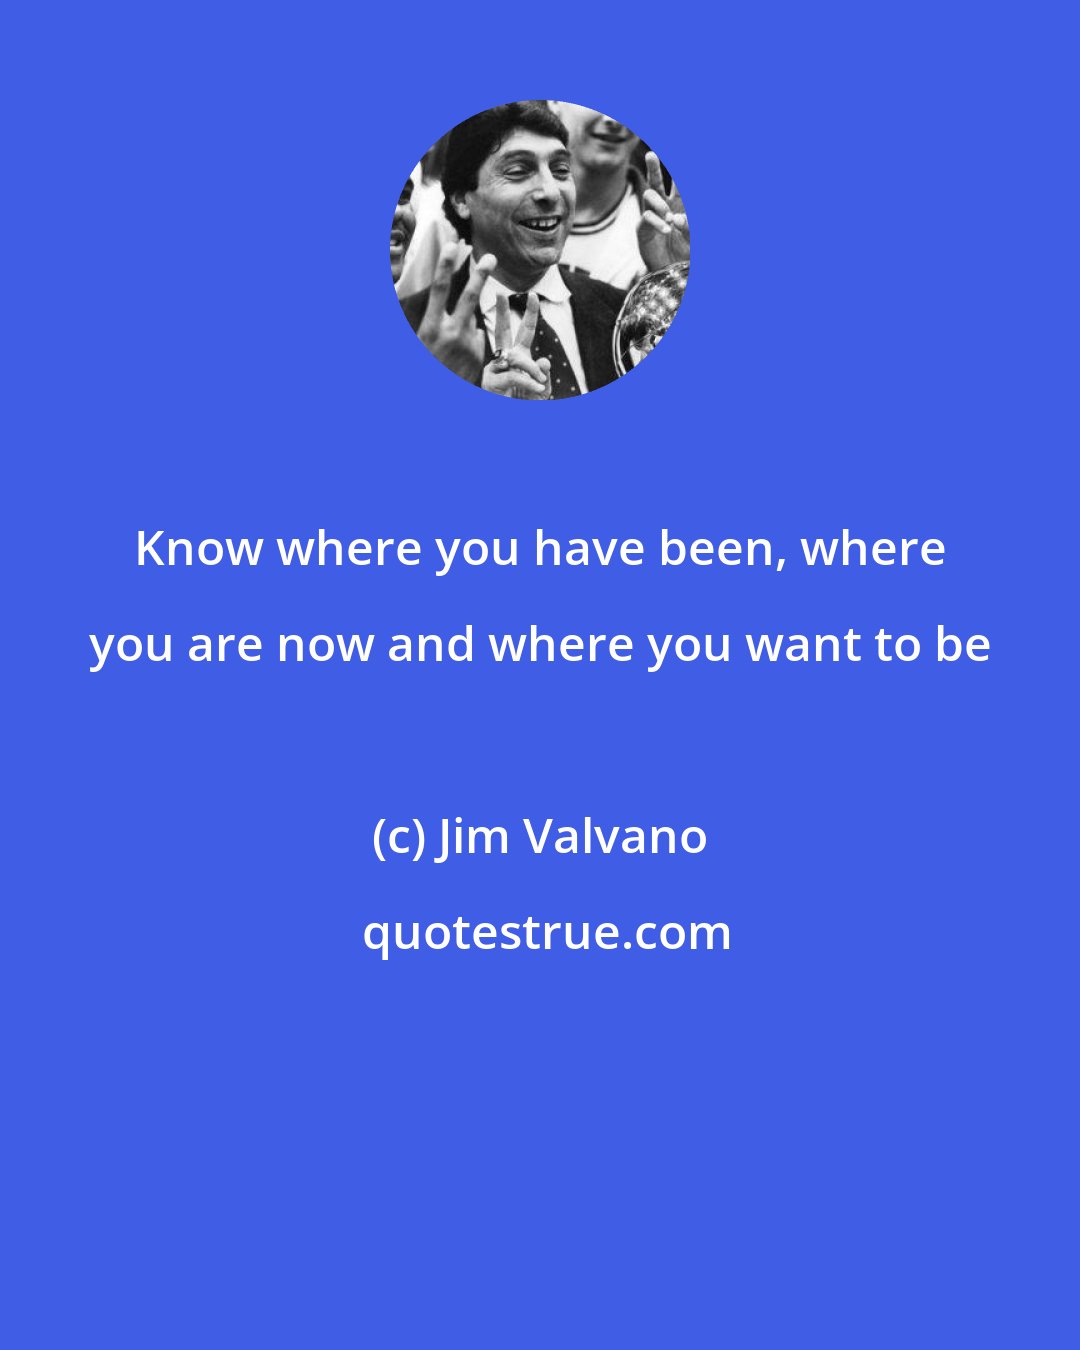 Jim Valvano: Know where you have been, where you are now and where you want to be